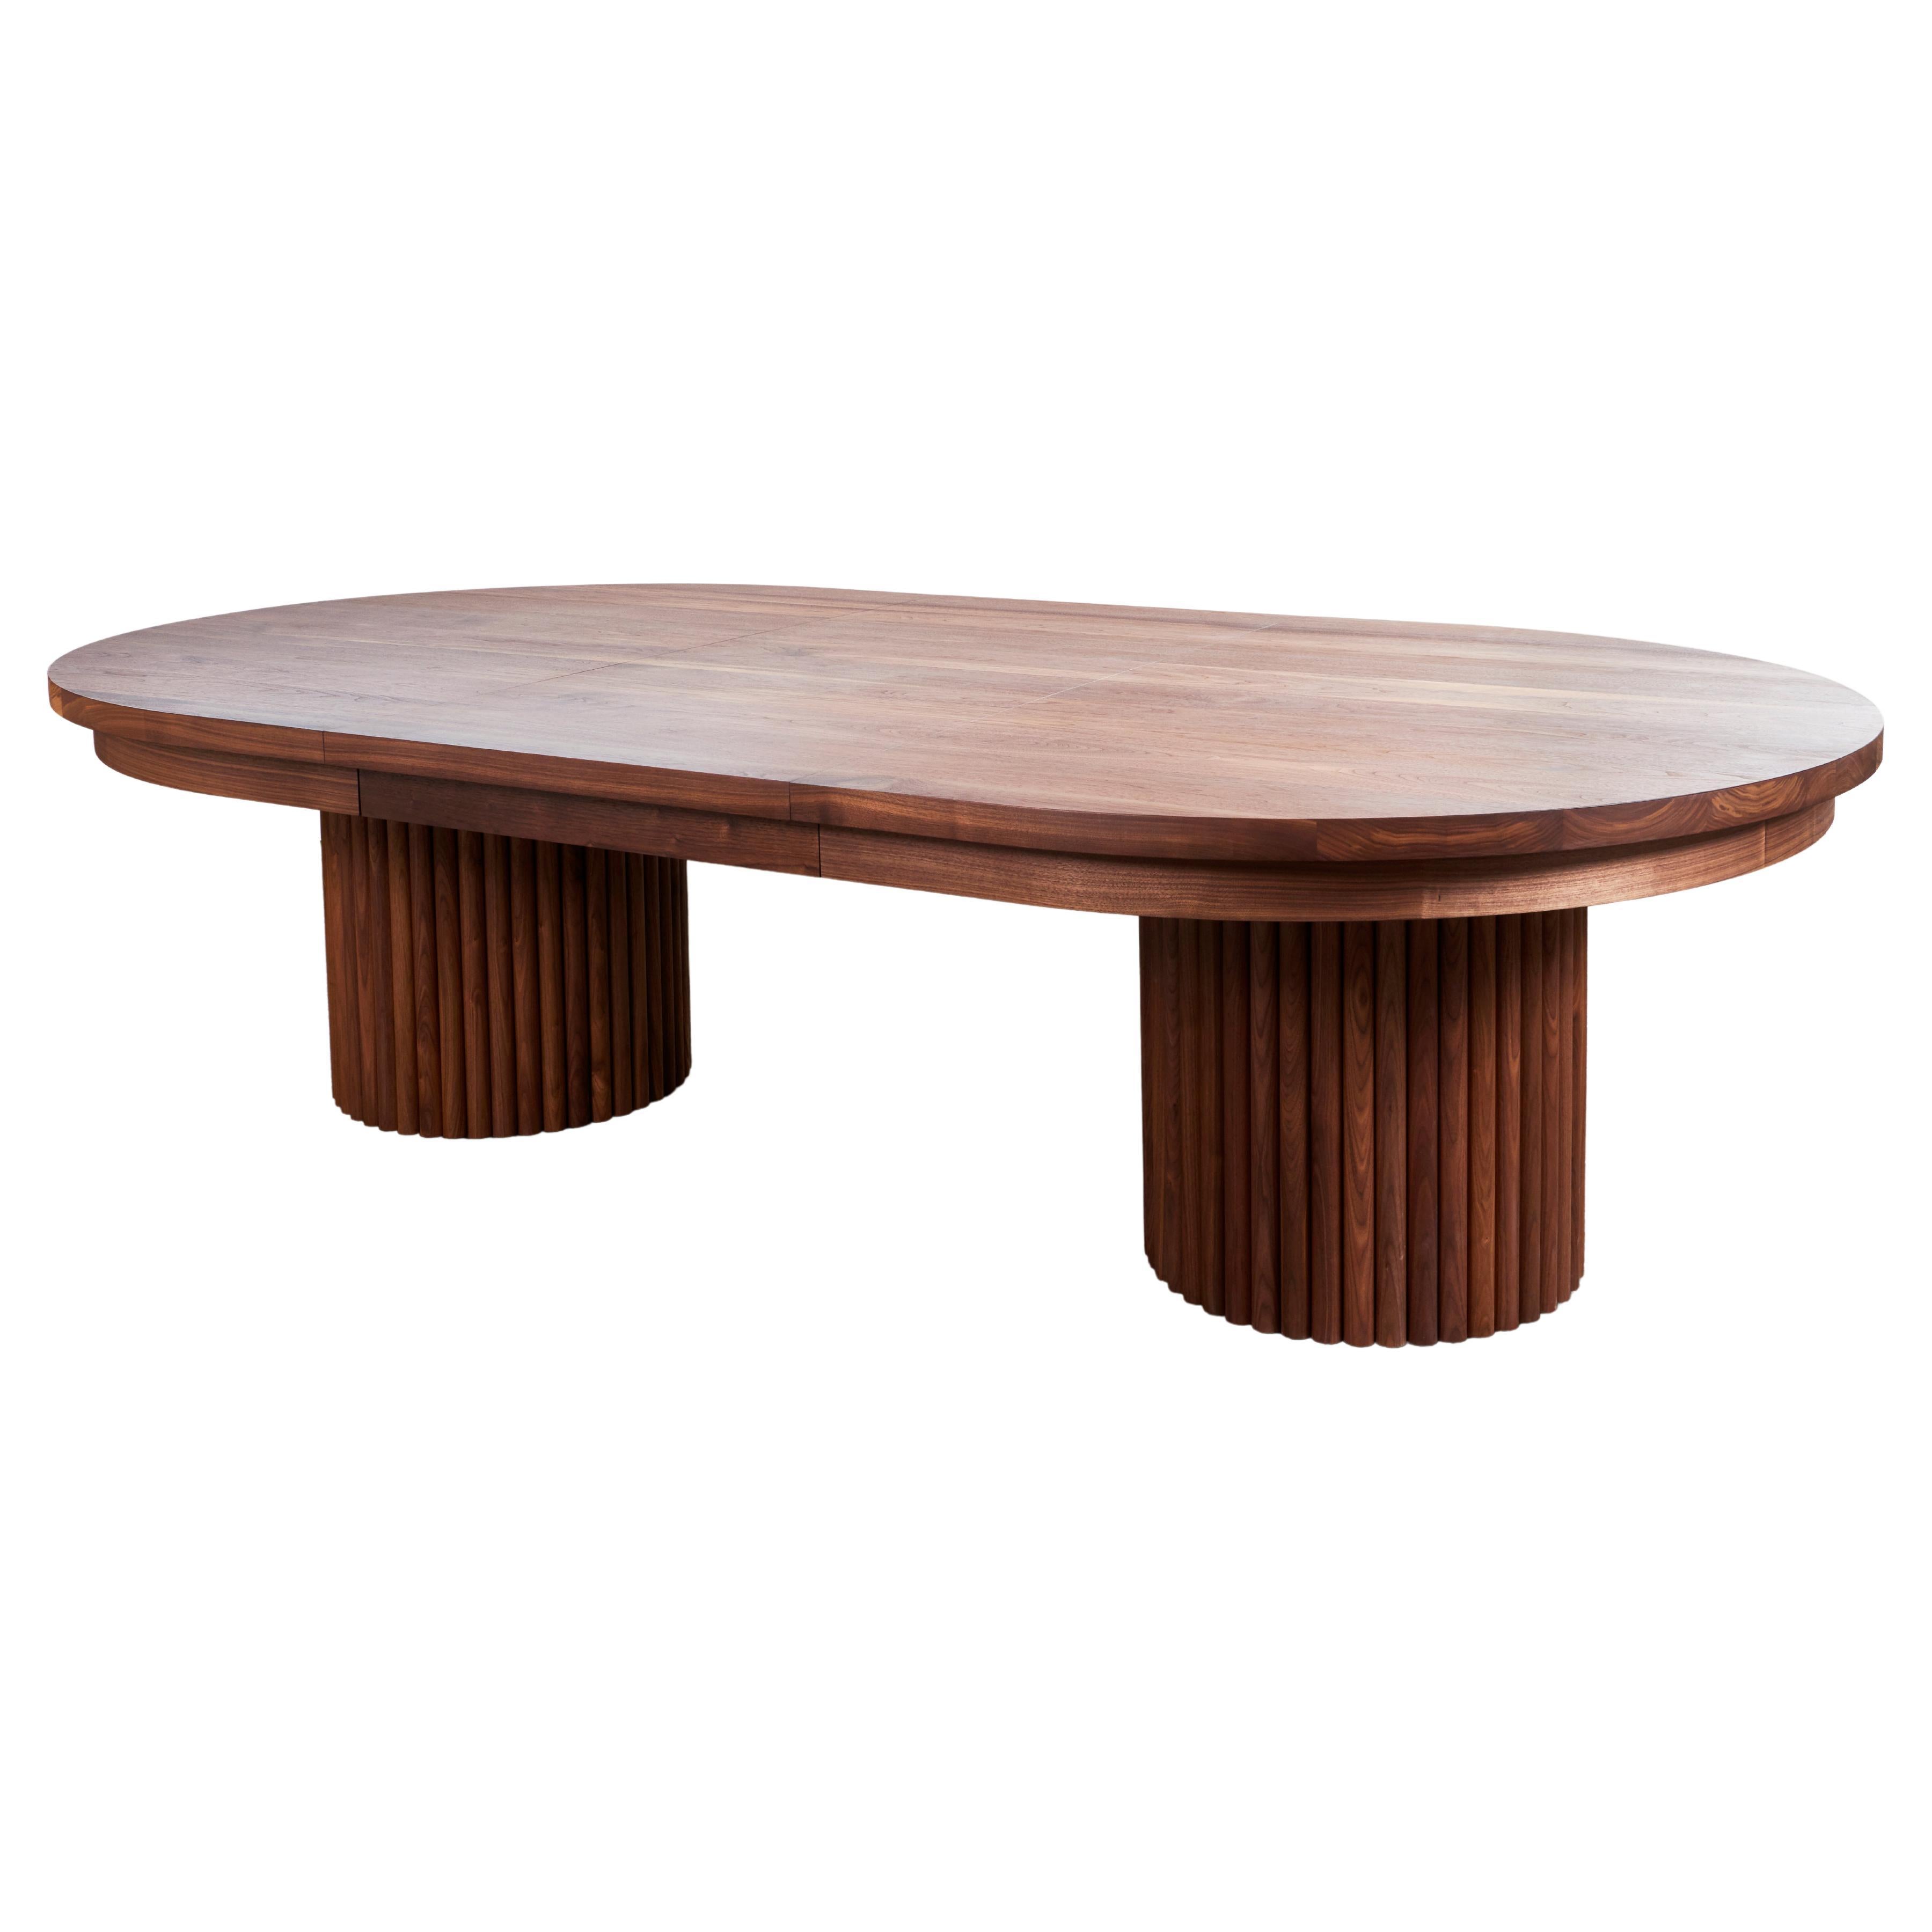 Brutalist Inspired "Marilyn" Dining Table with Adjustable Leaf by Kate Duncan For Sale